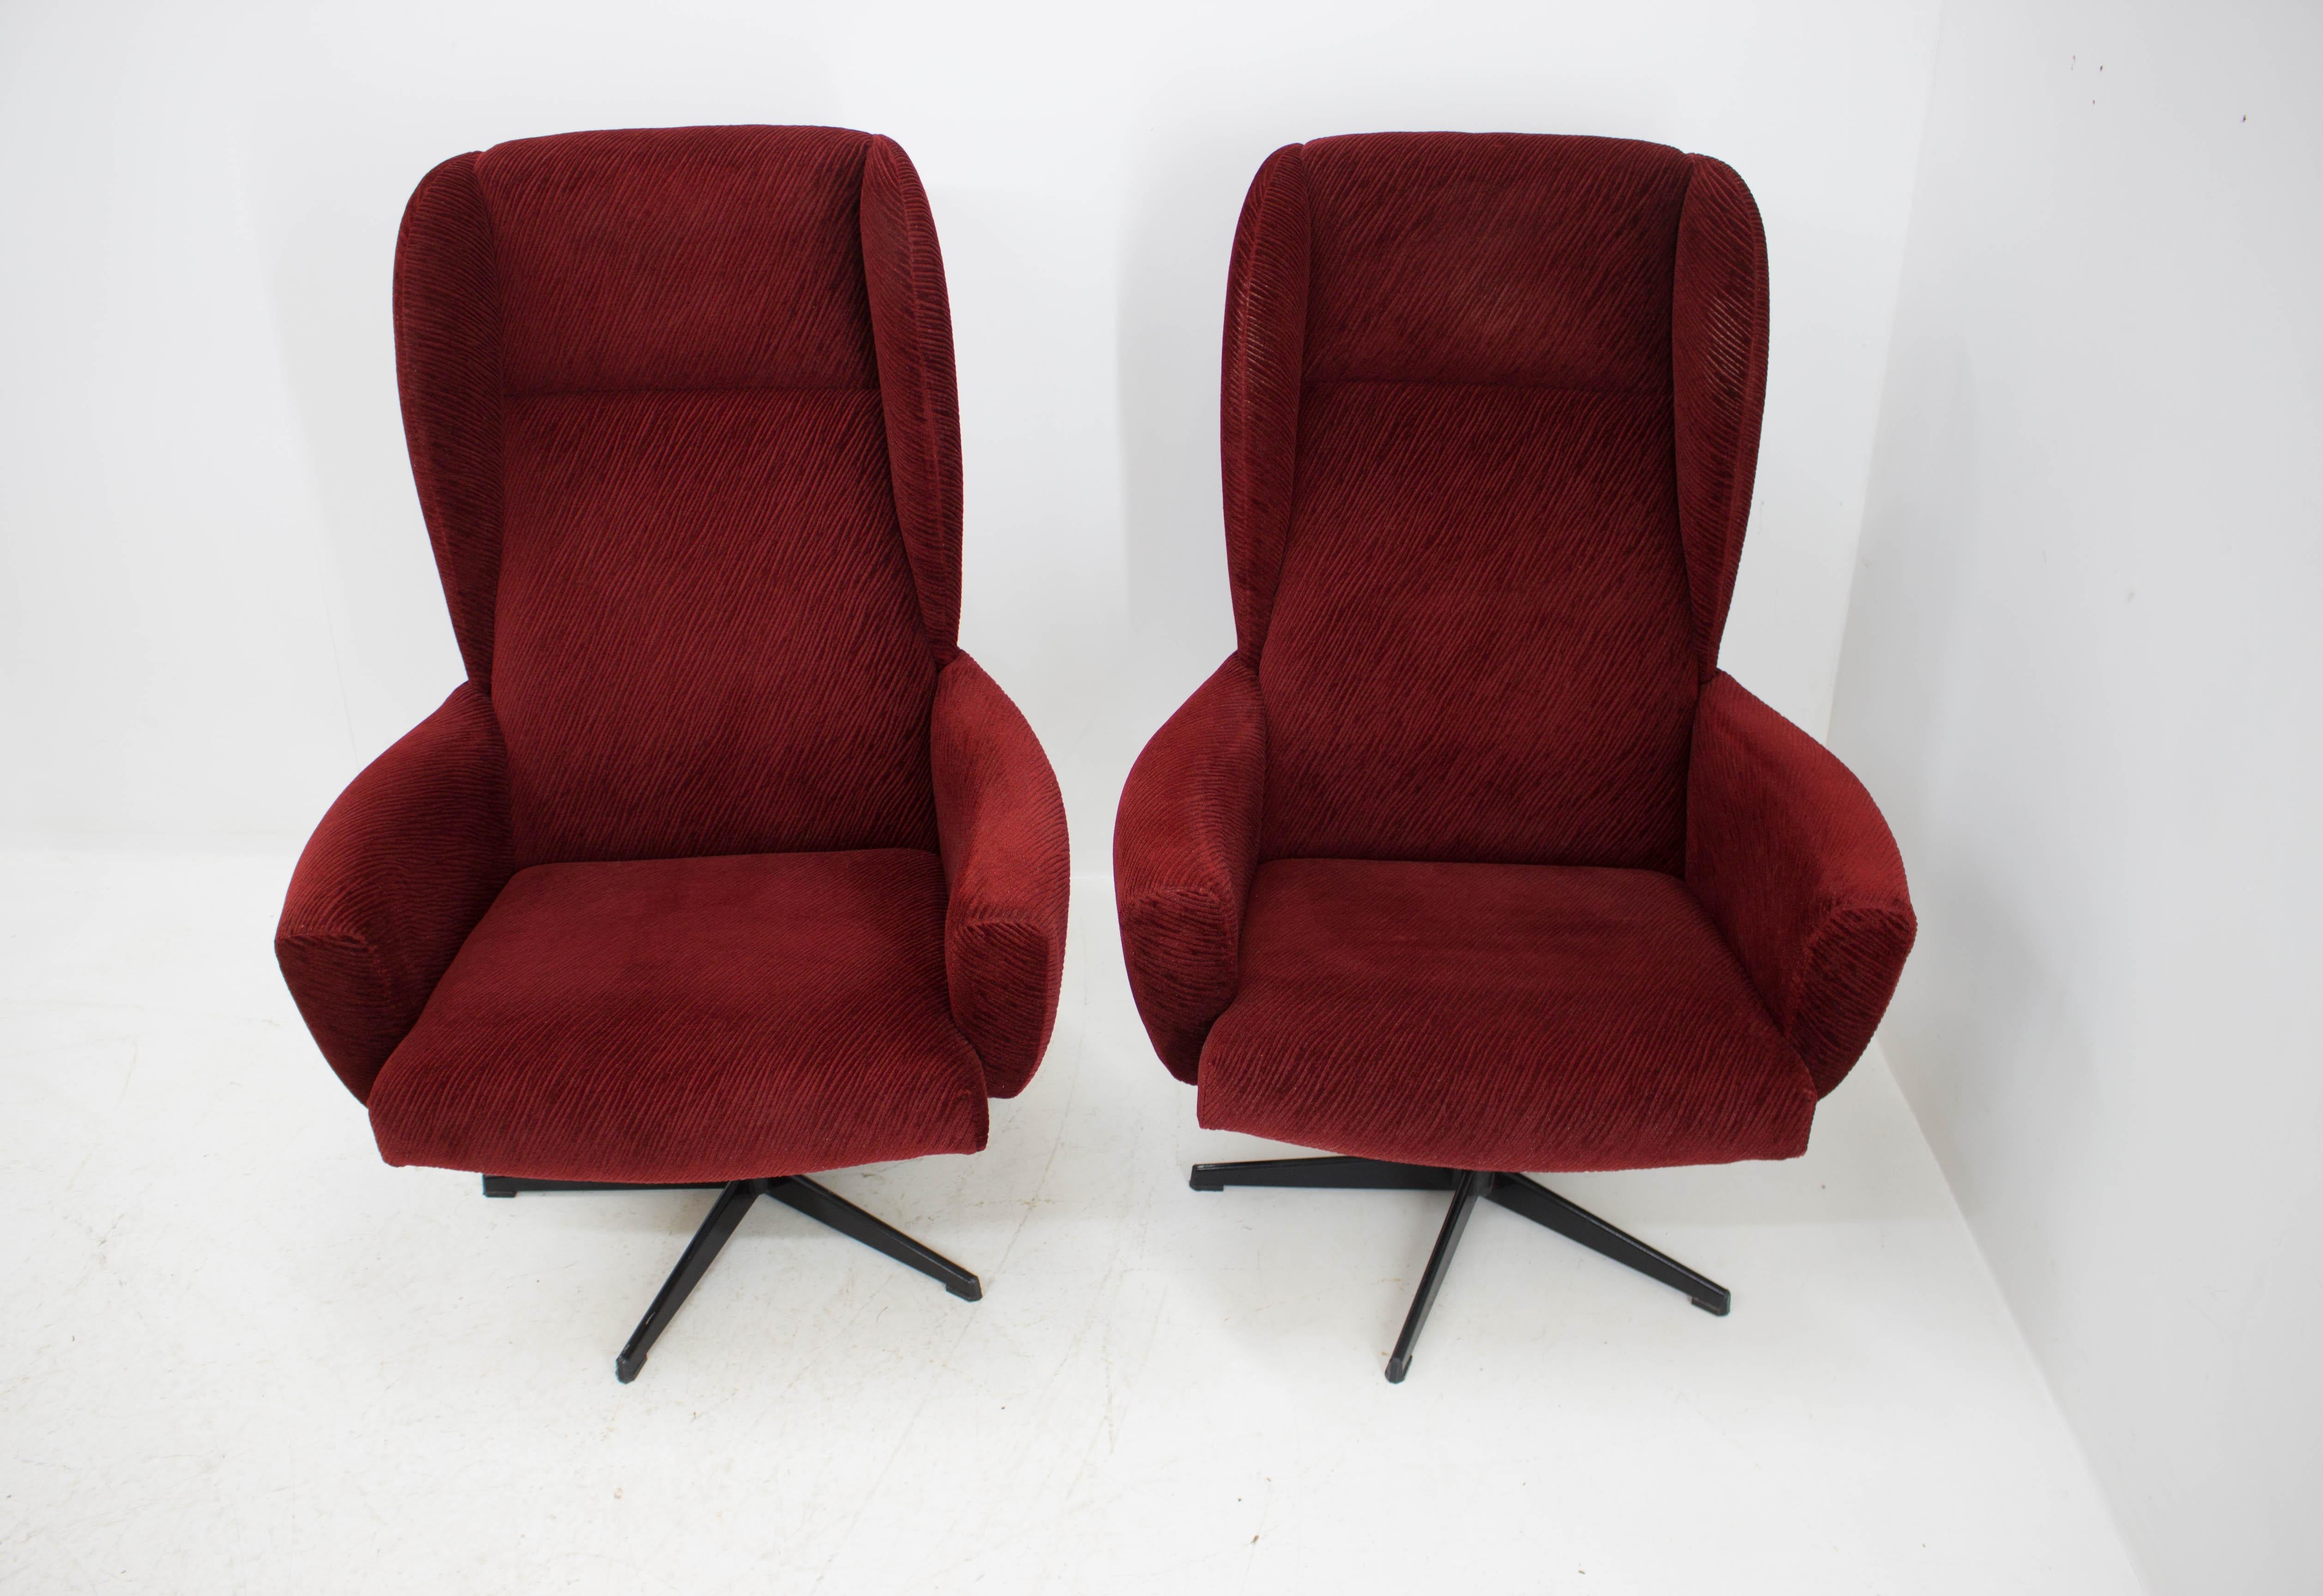 Steel Swivel Wing Chair in Red, 1980s For Sale